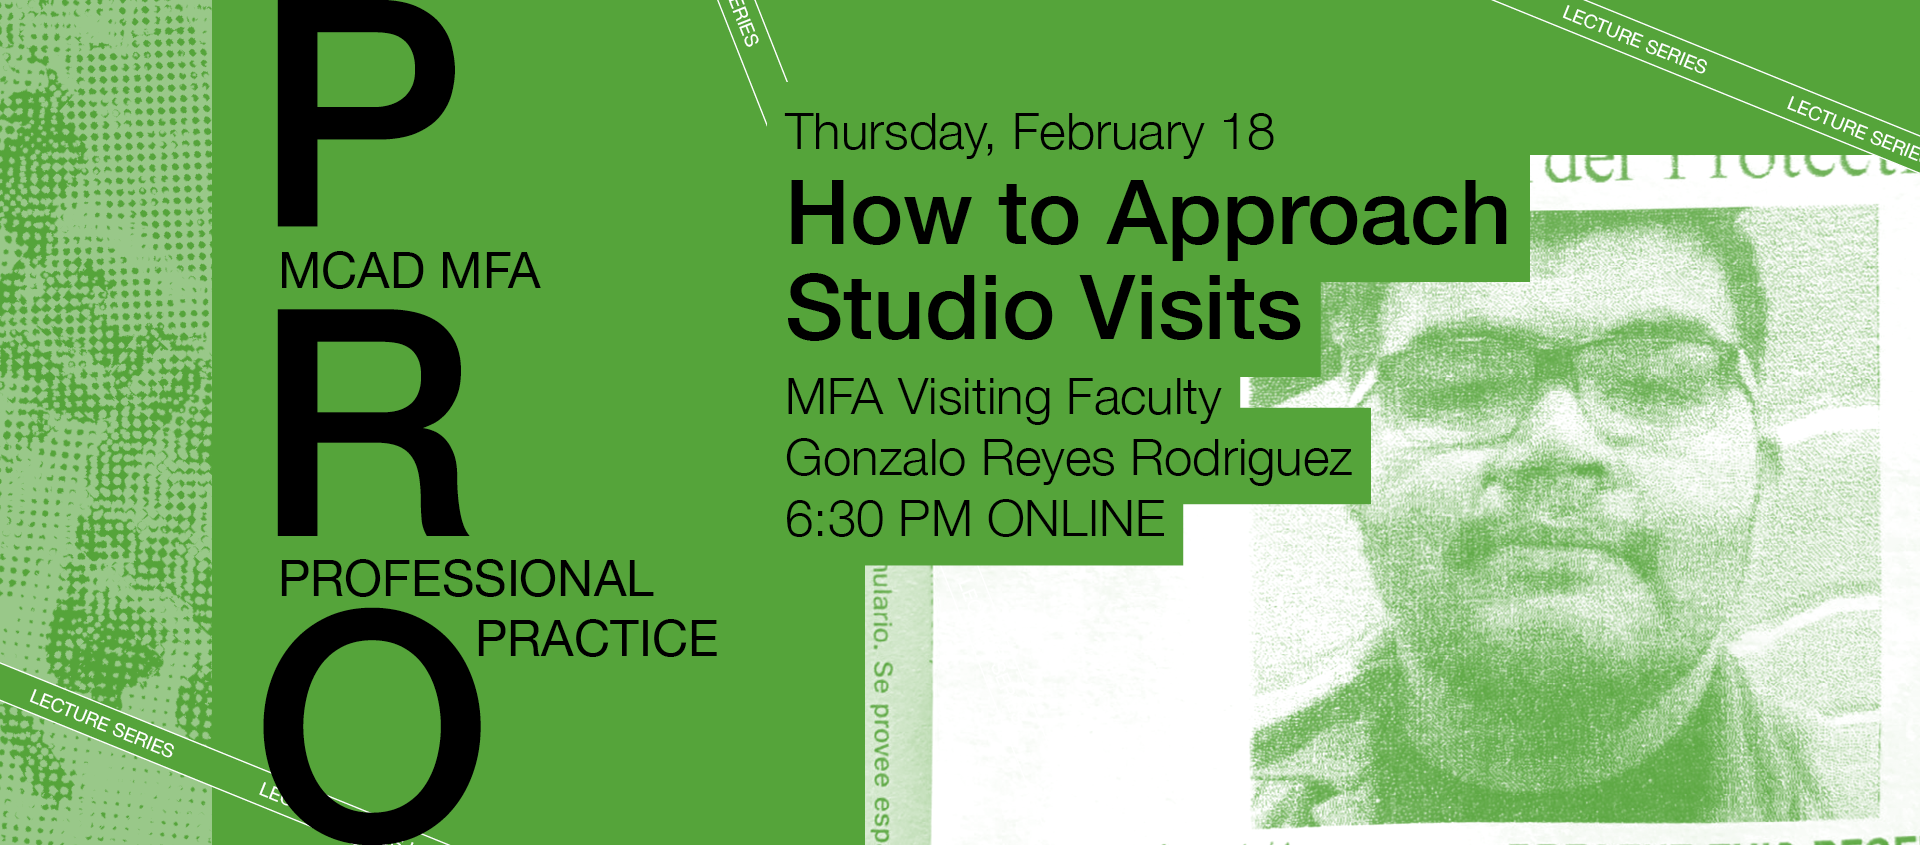 How to Approach Studio Visits